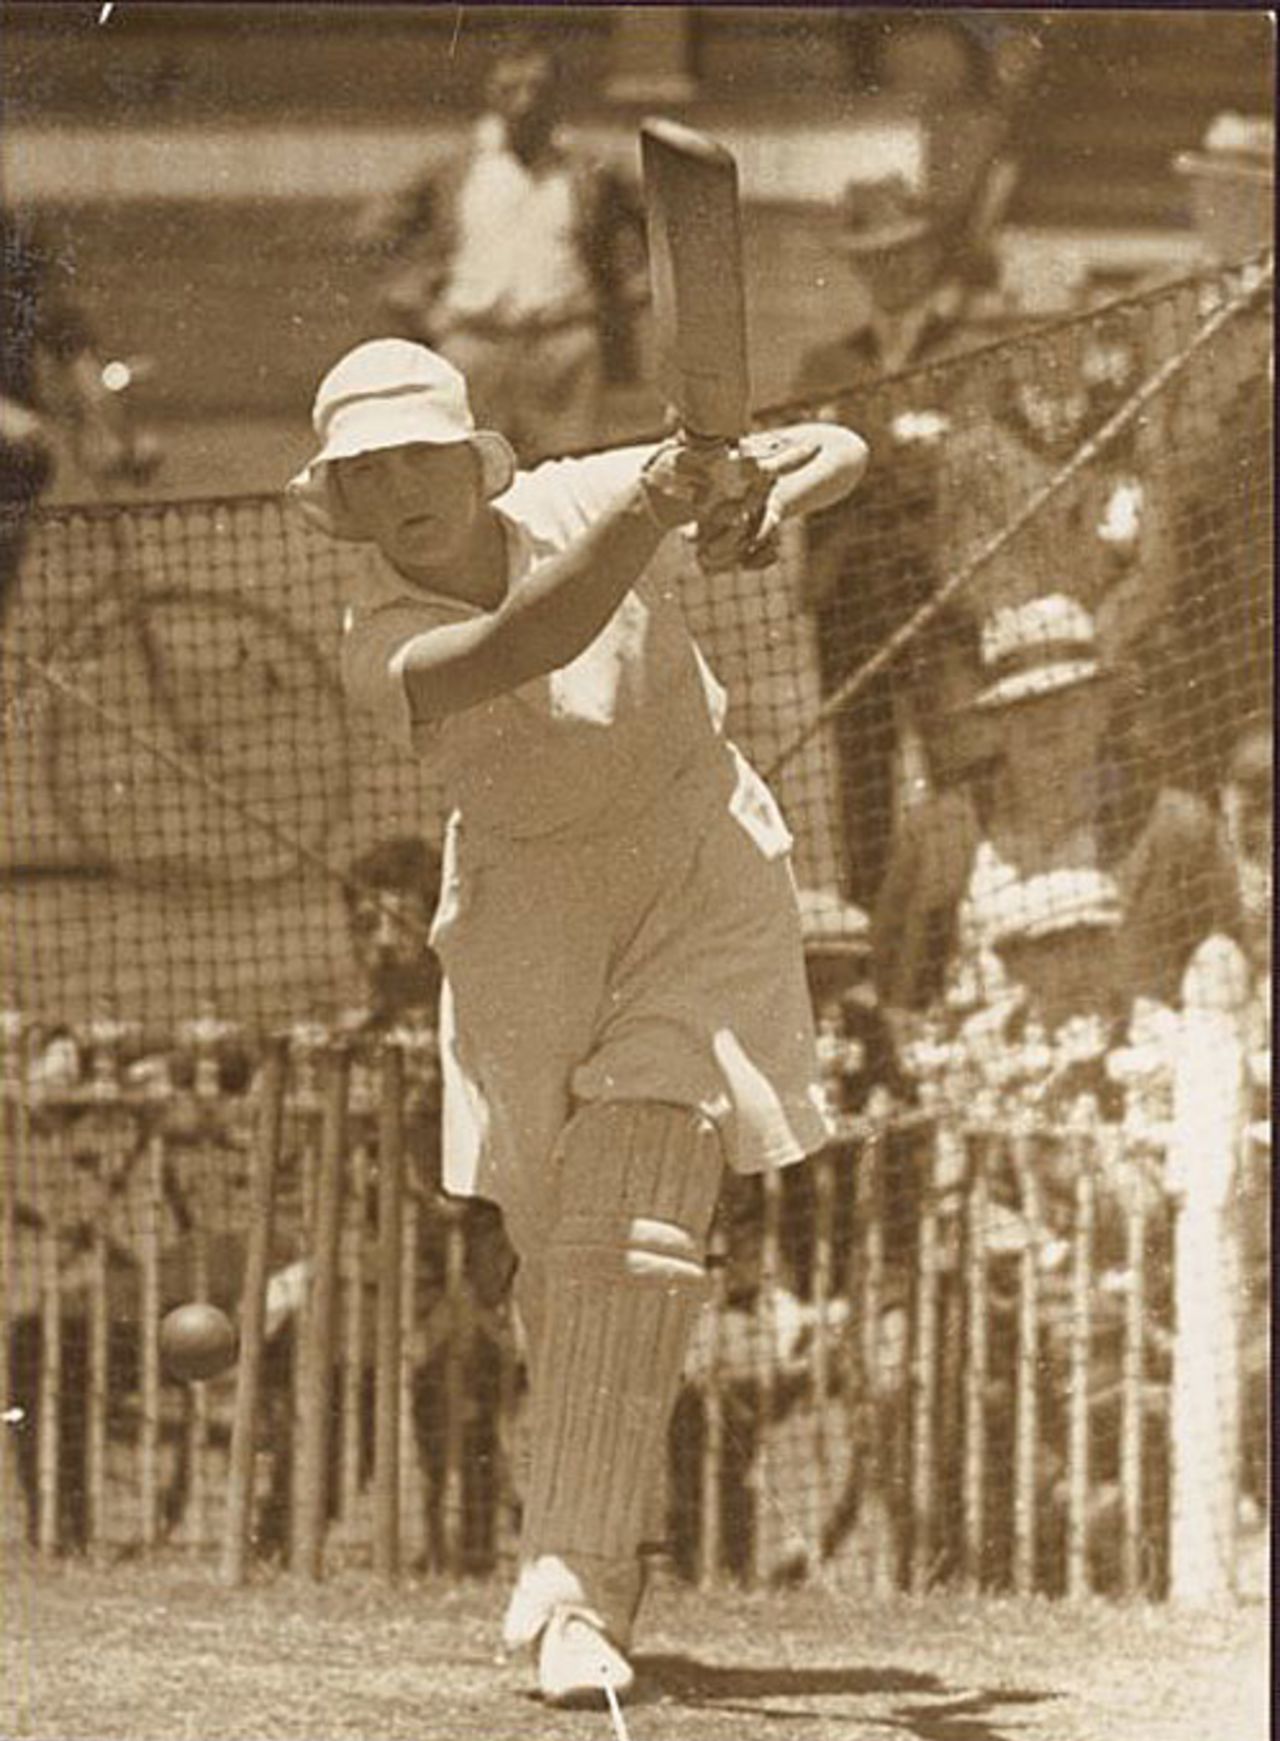 Betty Archdale strikes out on tour of Australia and New Zealand in 1934-35, National Library of Australia